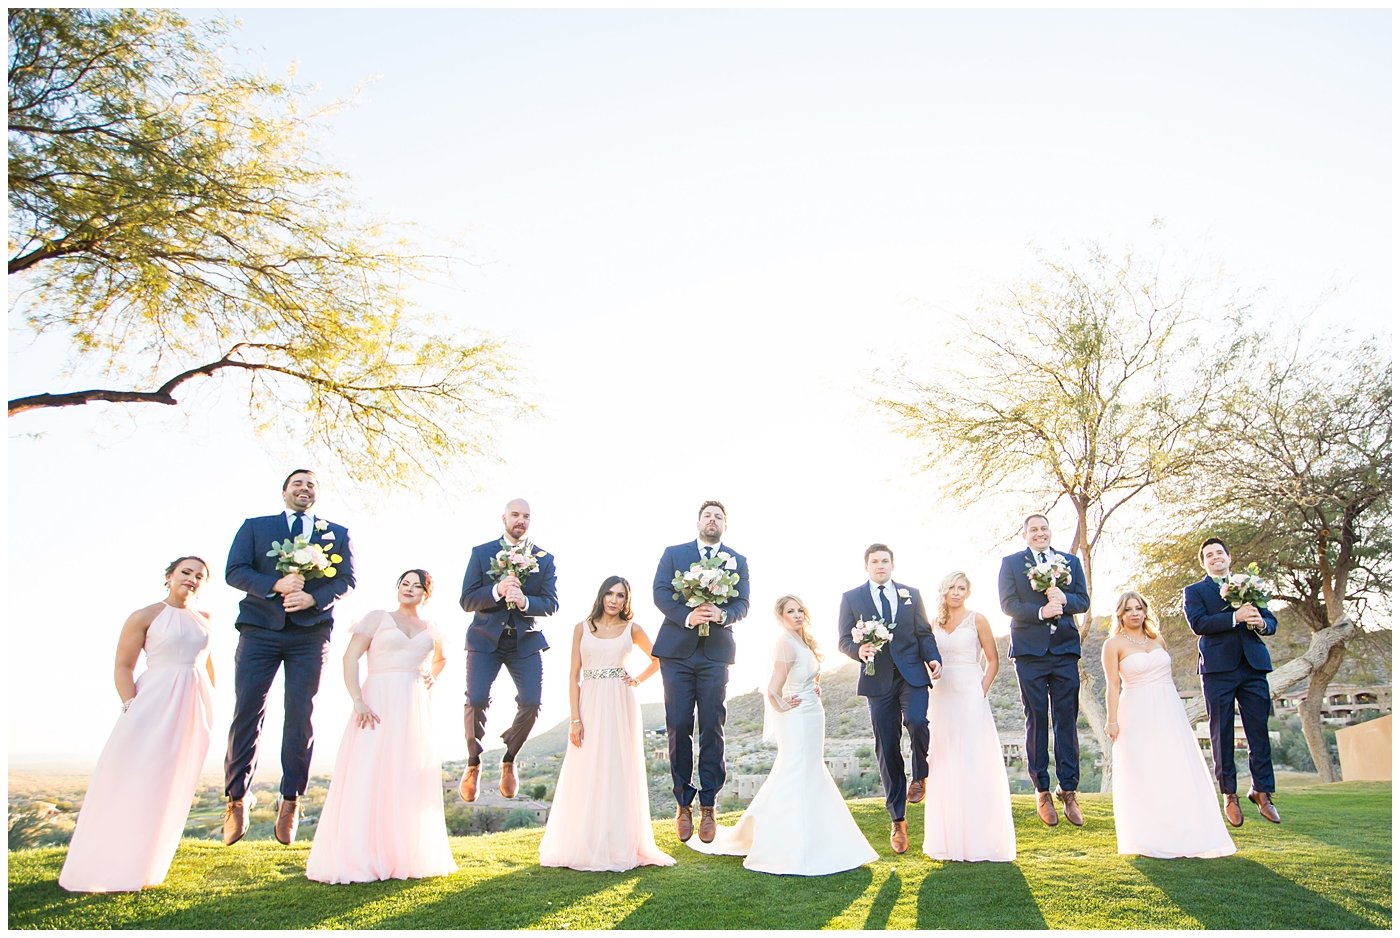 gorgeous bride with side swept hair in racerback pronovias dress and blush pink, white rose and eucalyptus greenery wedding bouquet with groom in navy suit and tie with bridal party bridesmaids in blush pink dresses and groomsmen in navy blue suits on wedding day